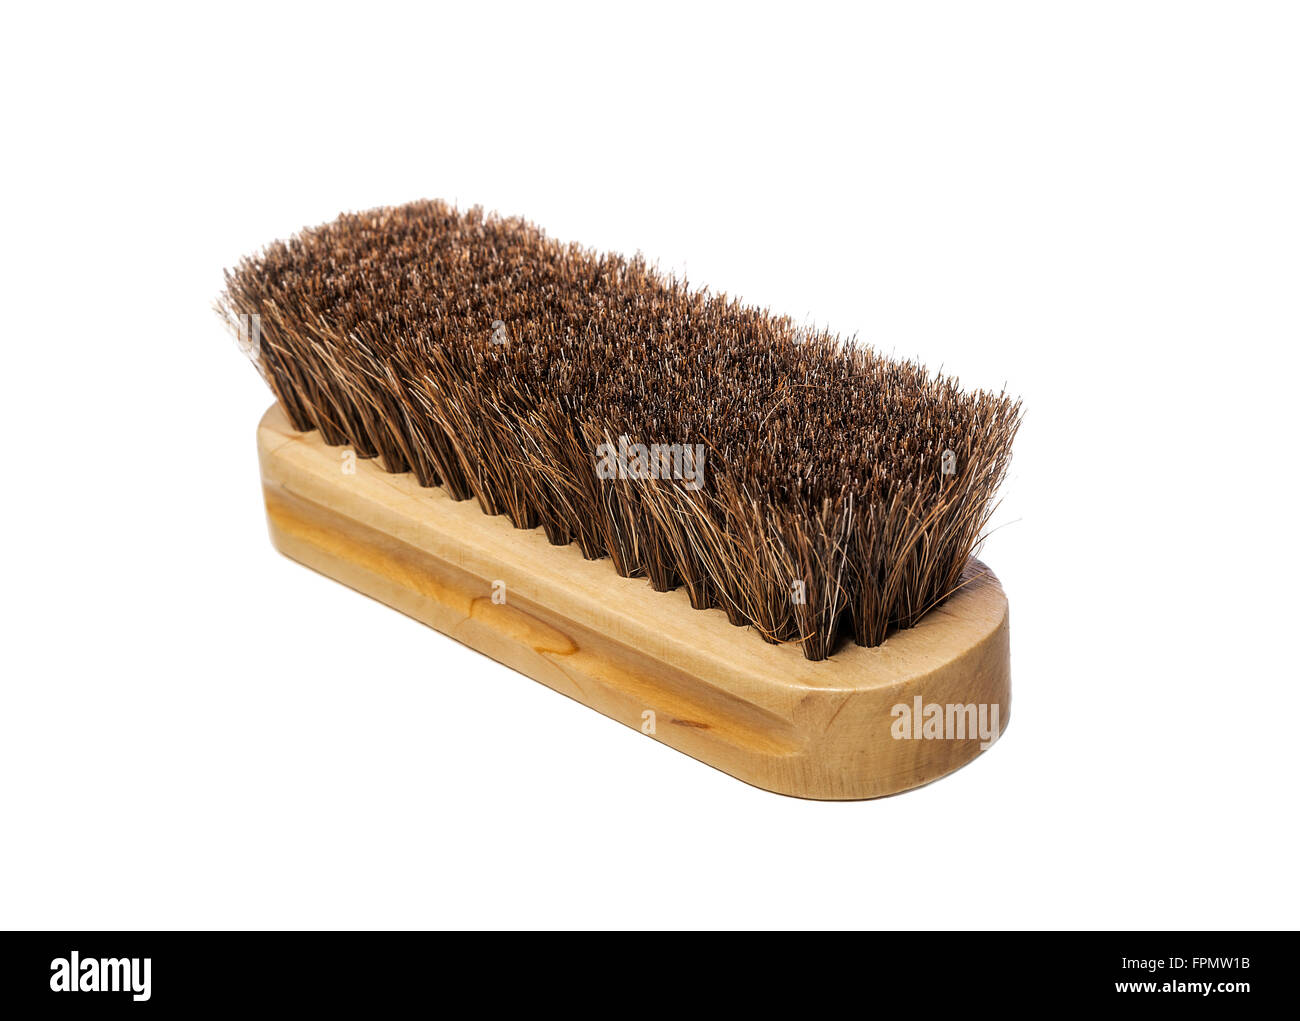 Clothes brush on a white background. Stock Photo